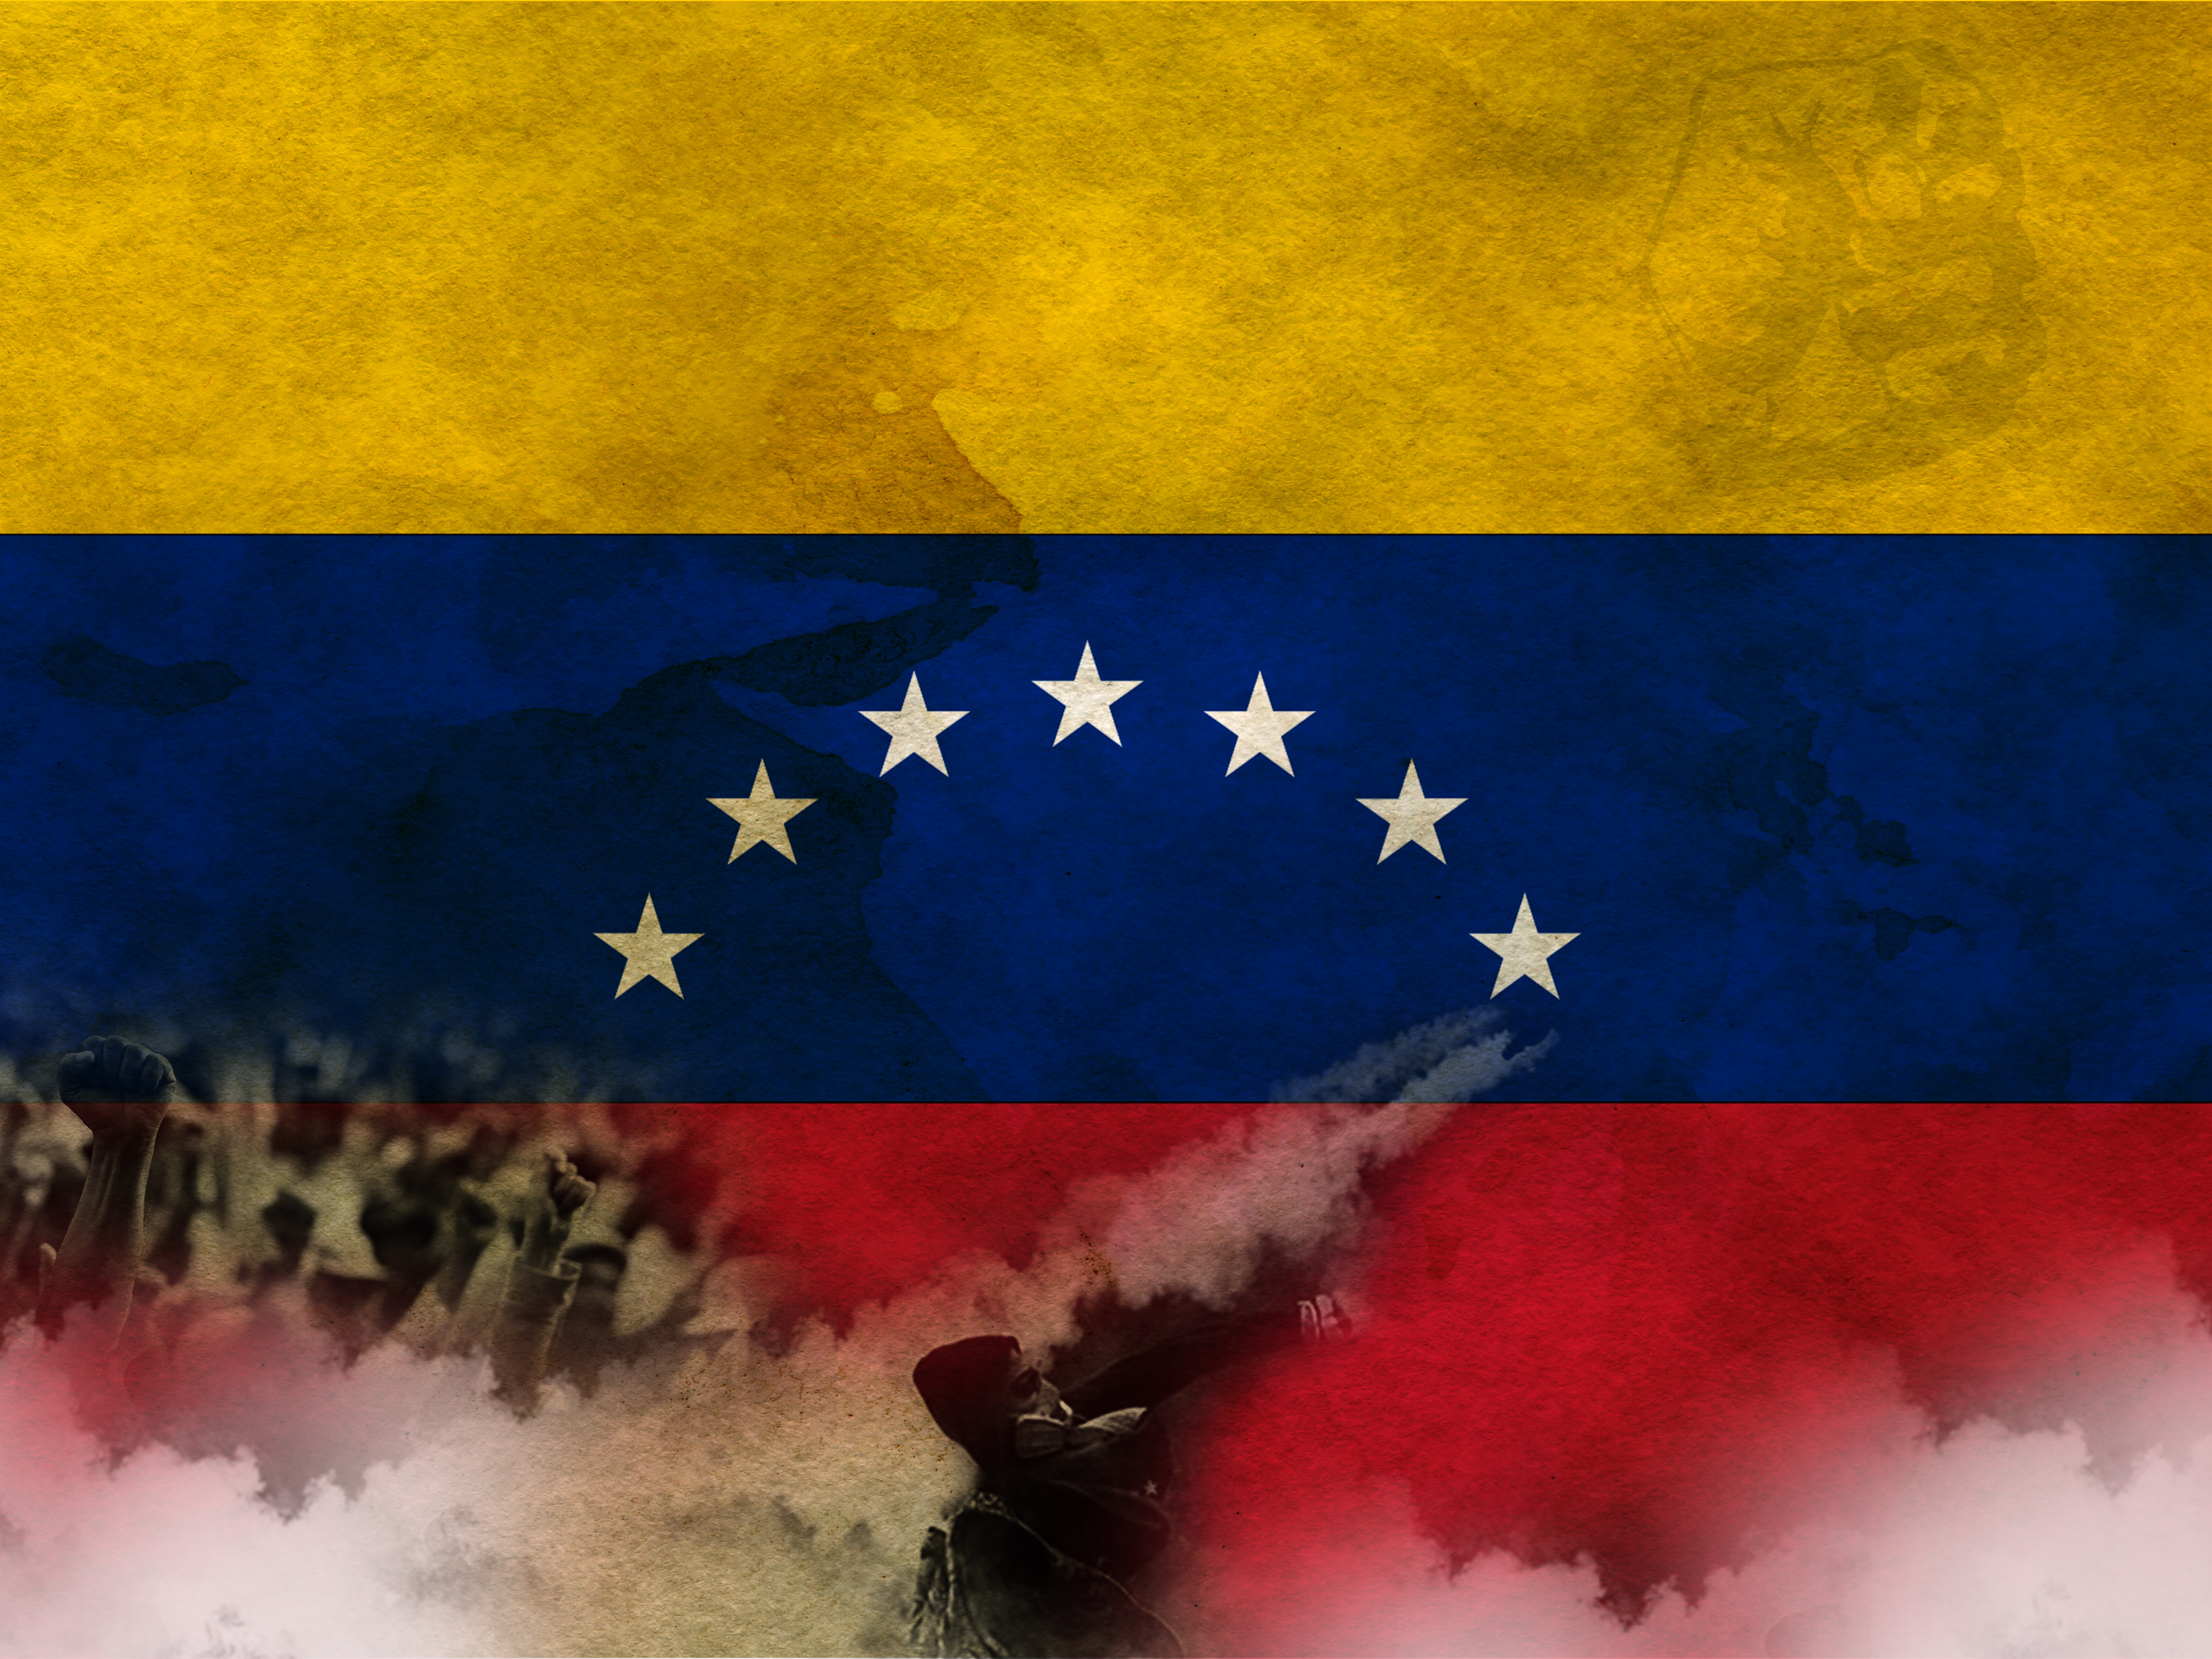 Venezuela's flag and protesters